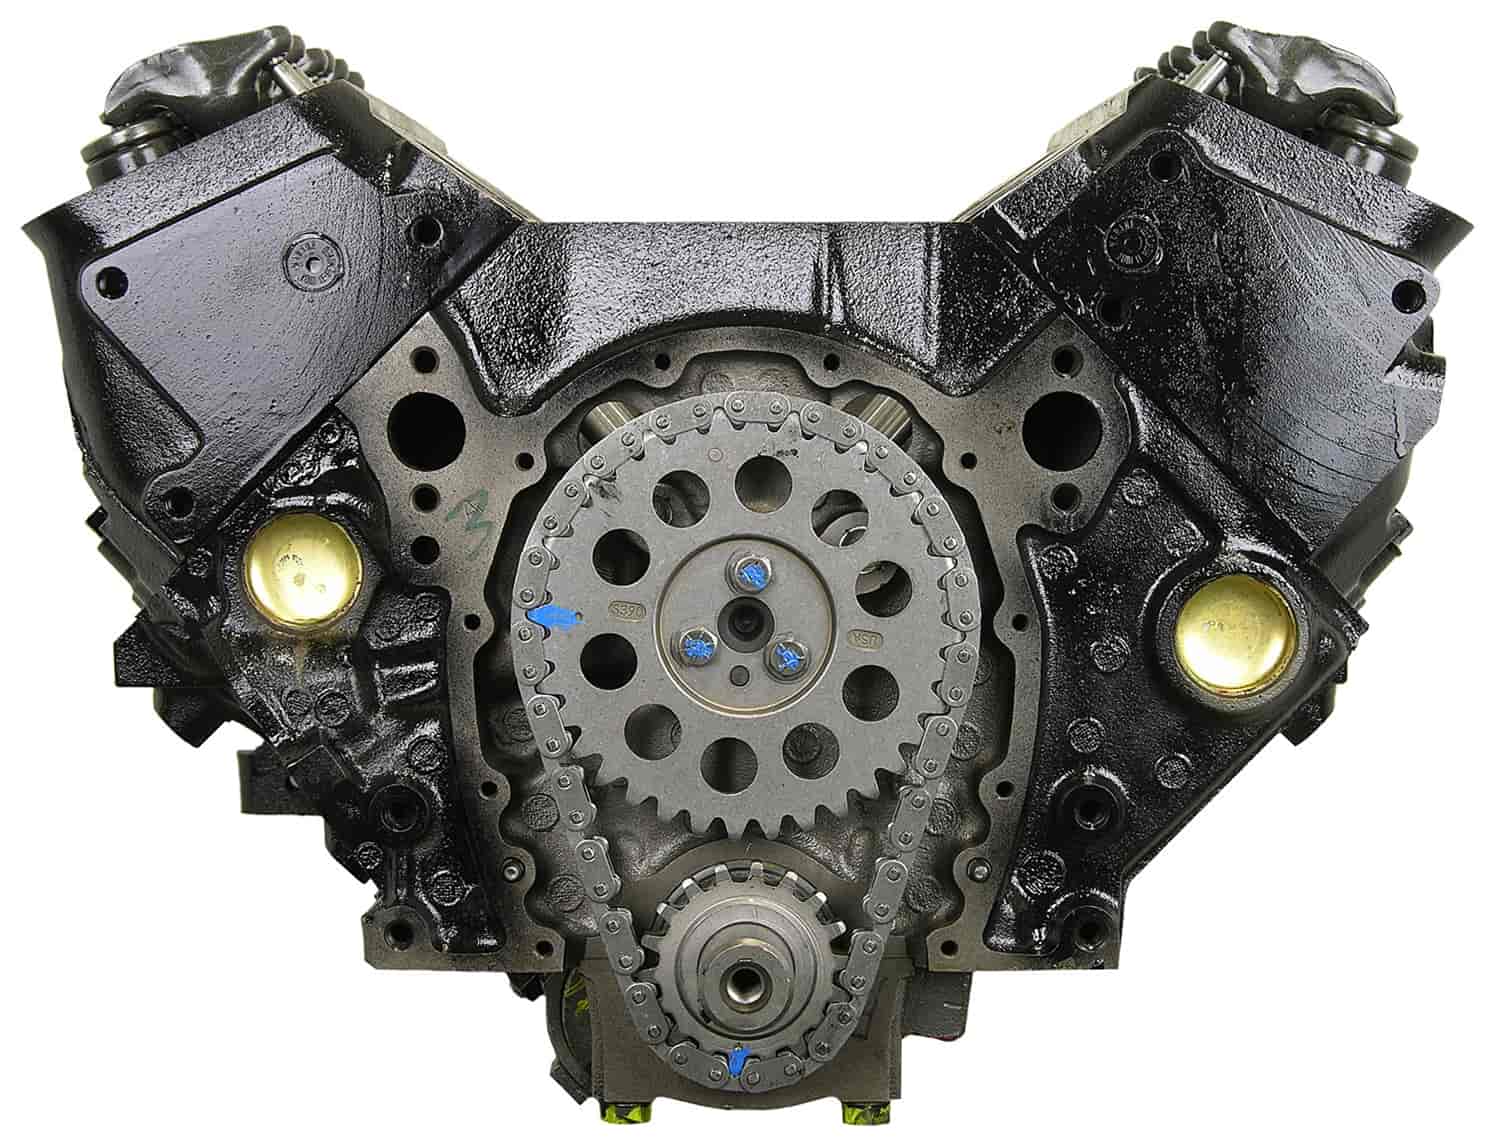 Remanufactured Crate Engine for Marine Applications with 1986-1988 Chevy 4.3L V6